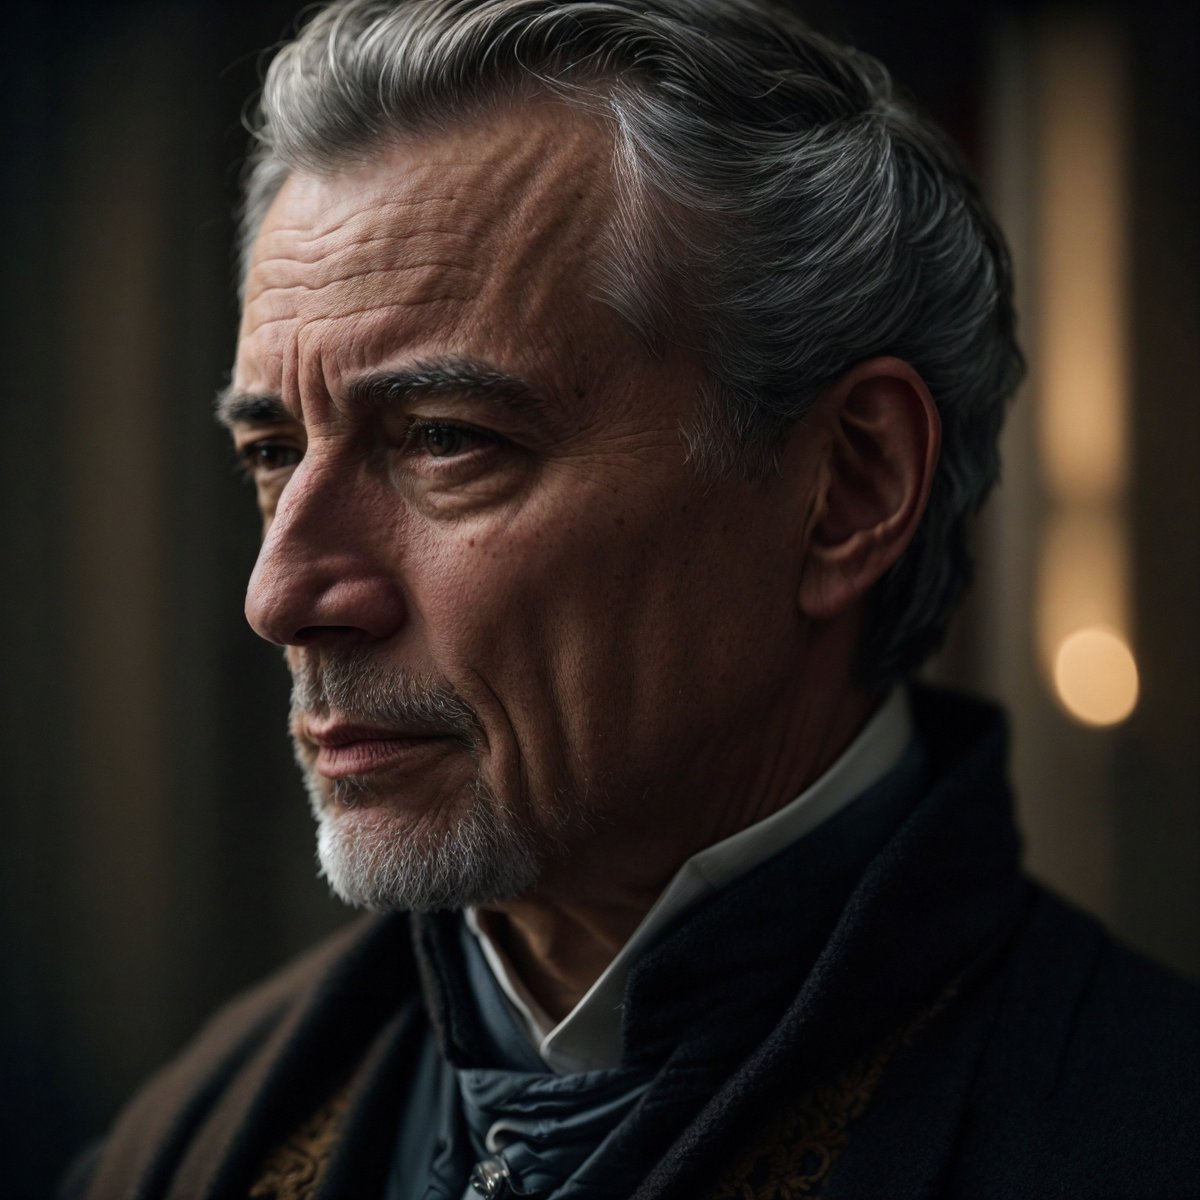 Who is this? Marc's father, known only as the Comte, rules by coercion and fear. To even out his character he also swallowed a healthy dose of paranoia! You'll find him in my #DarkFantasy #WIP, Man of War. #WritingCommunity #EvelynsWorld